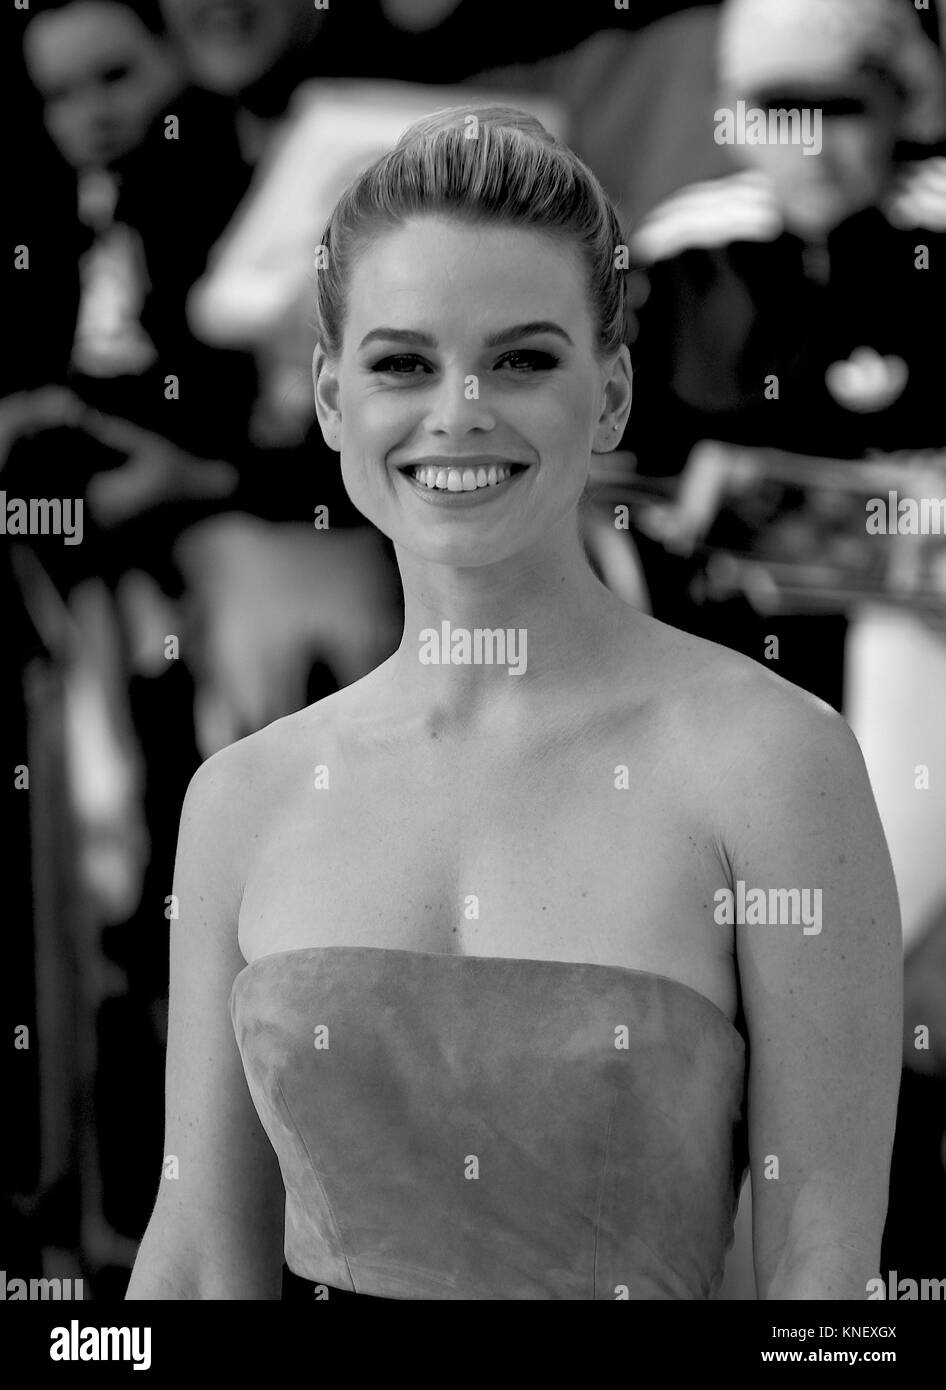 London, UK, 2nd May, 2013: Image digitally altered to monochrome Alice Eve attends the UK Premiere of 'Star Trek Into Darkness' at The Empire Cinema Stock Photo